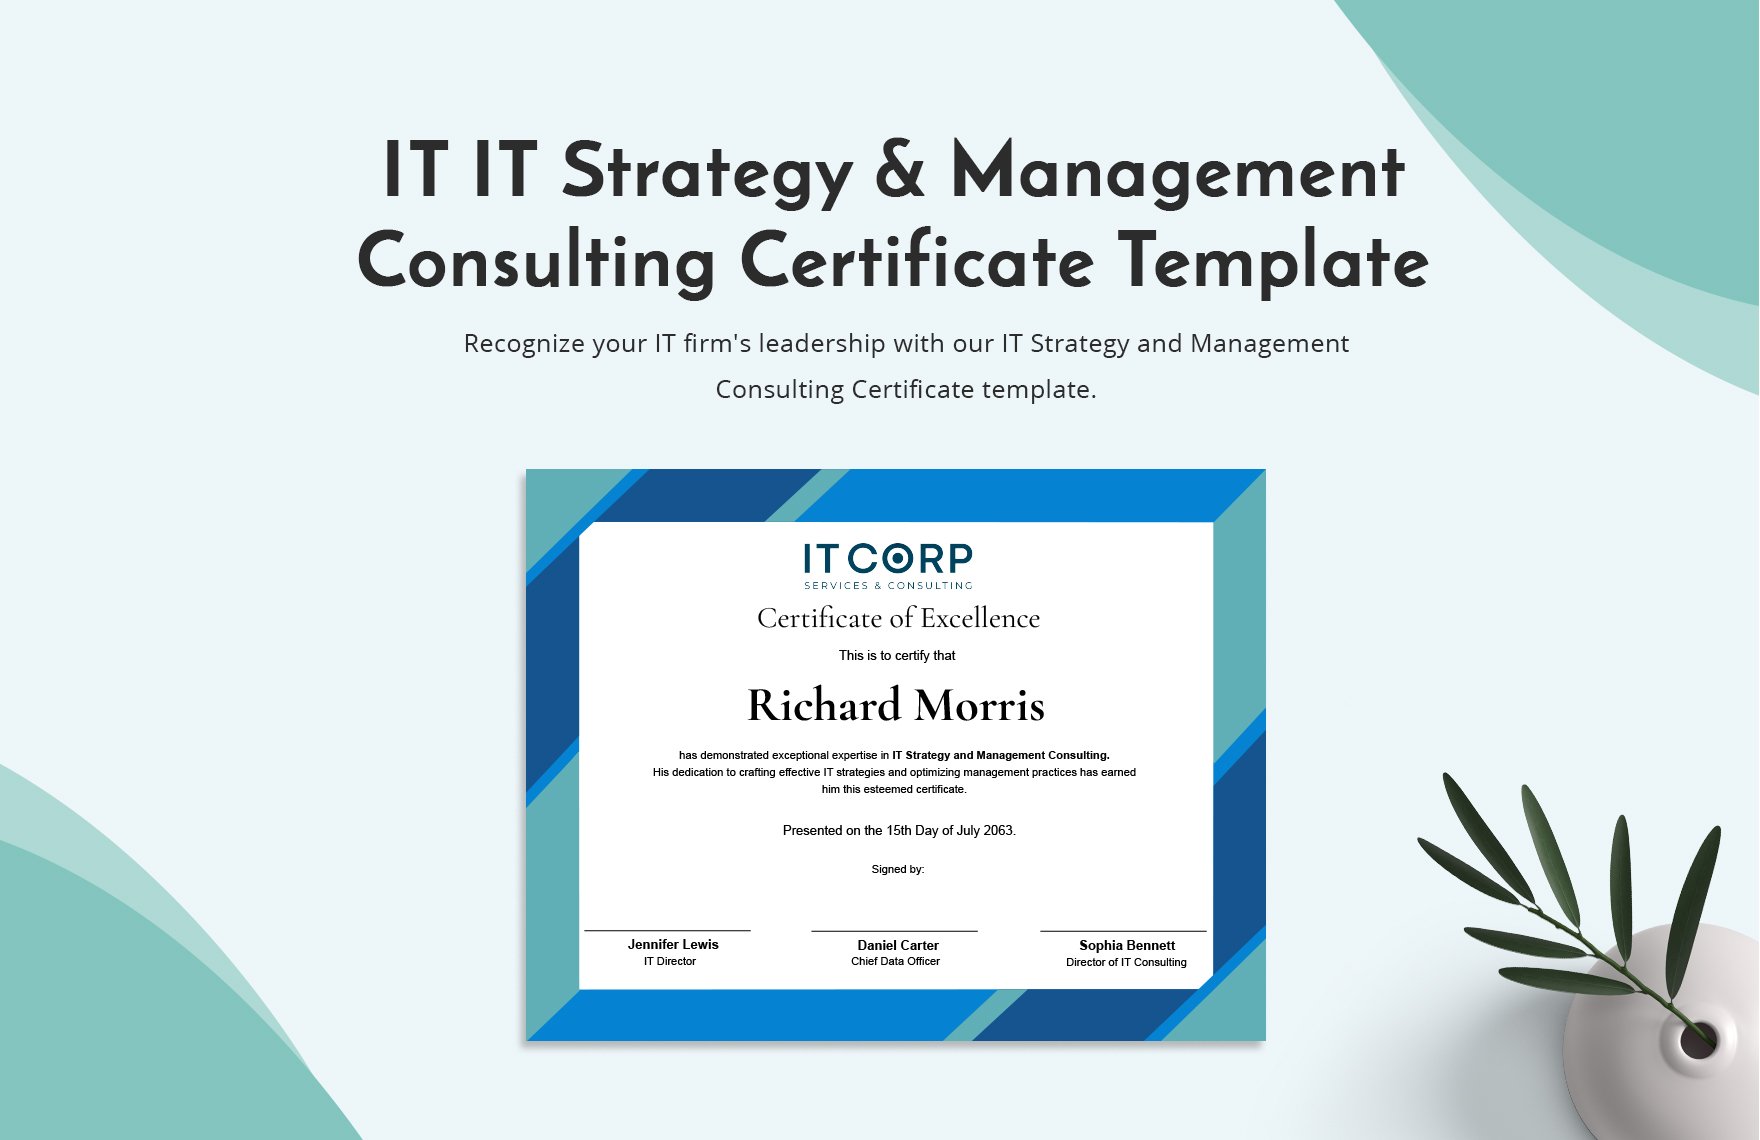 IT IT Strategy & Management Consulting Certificate Template